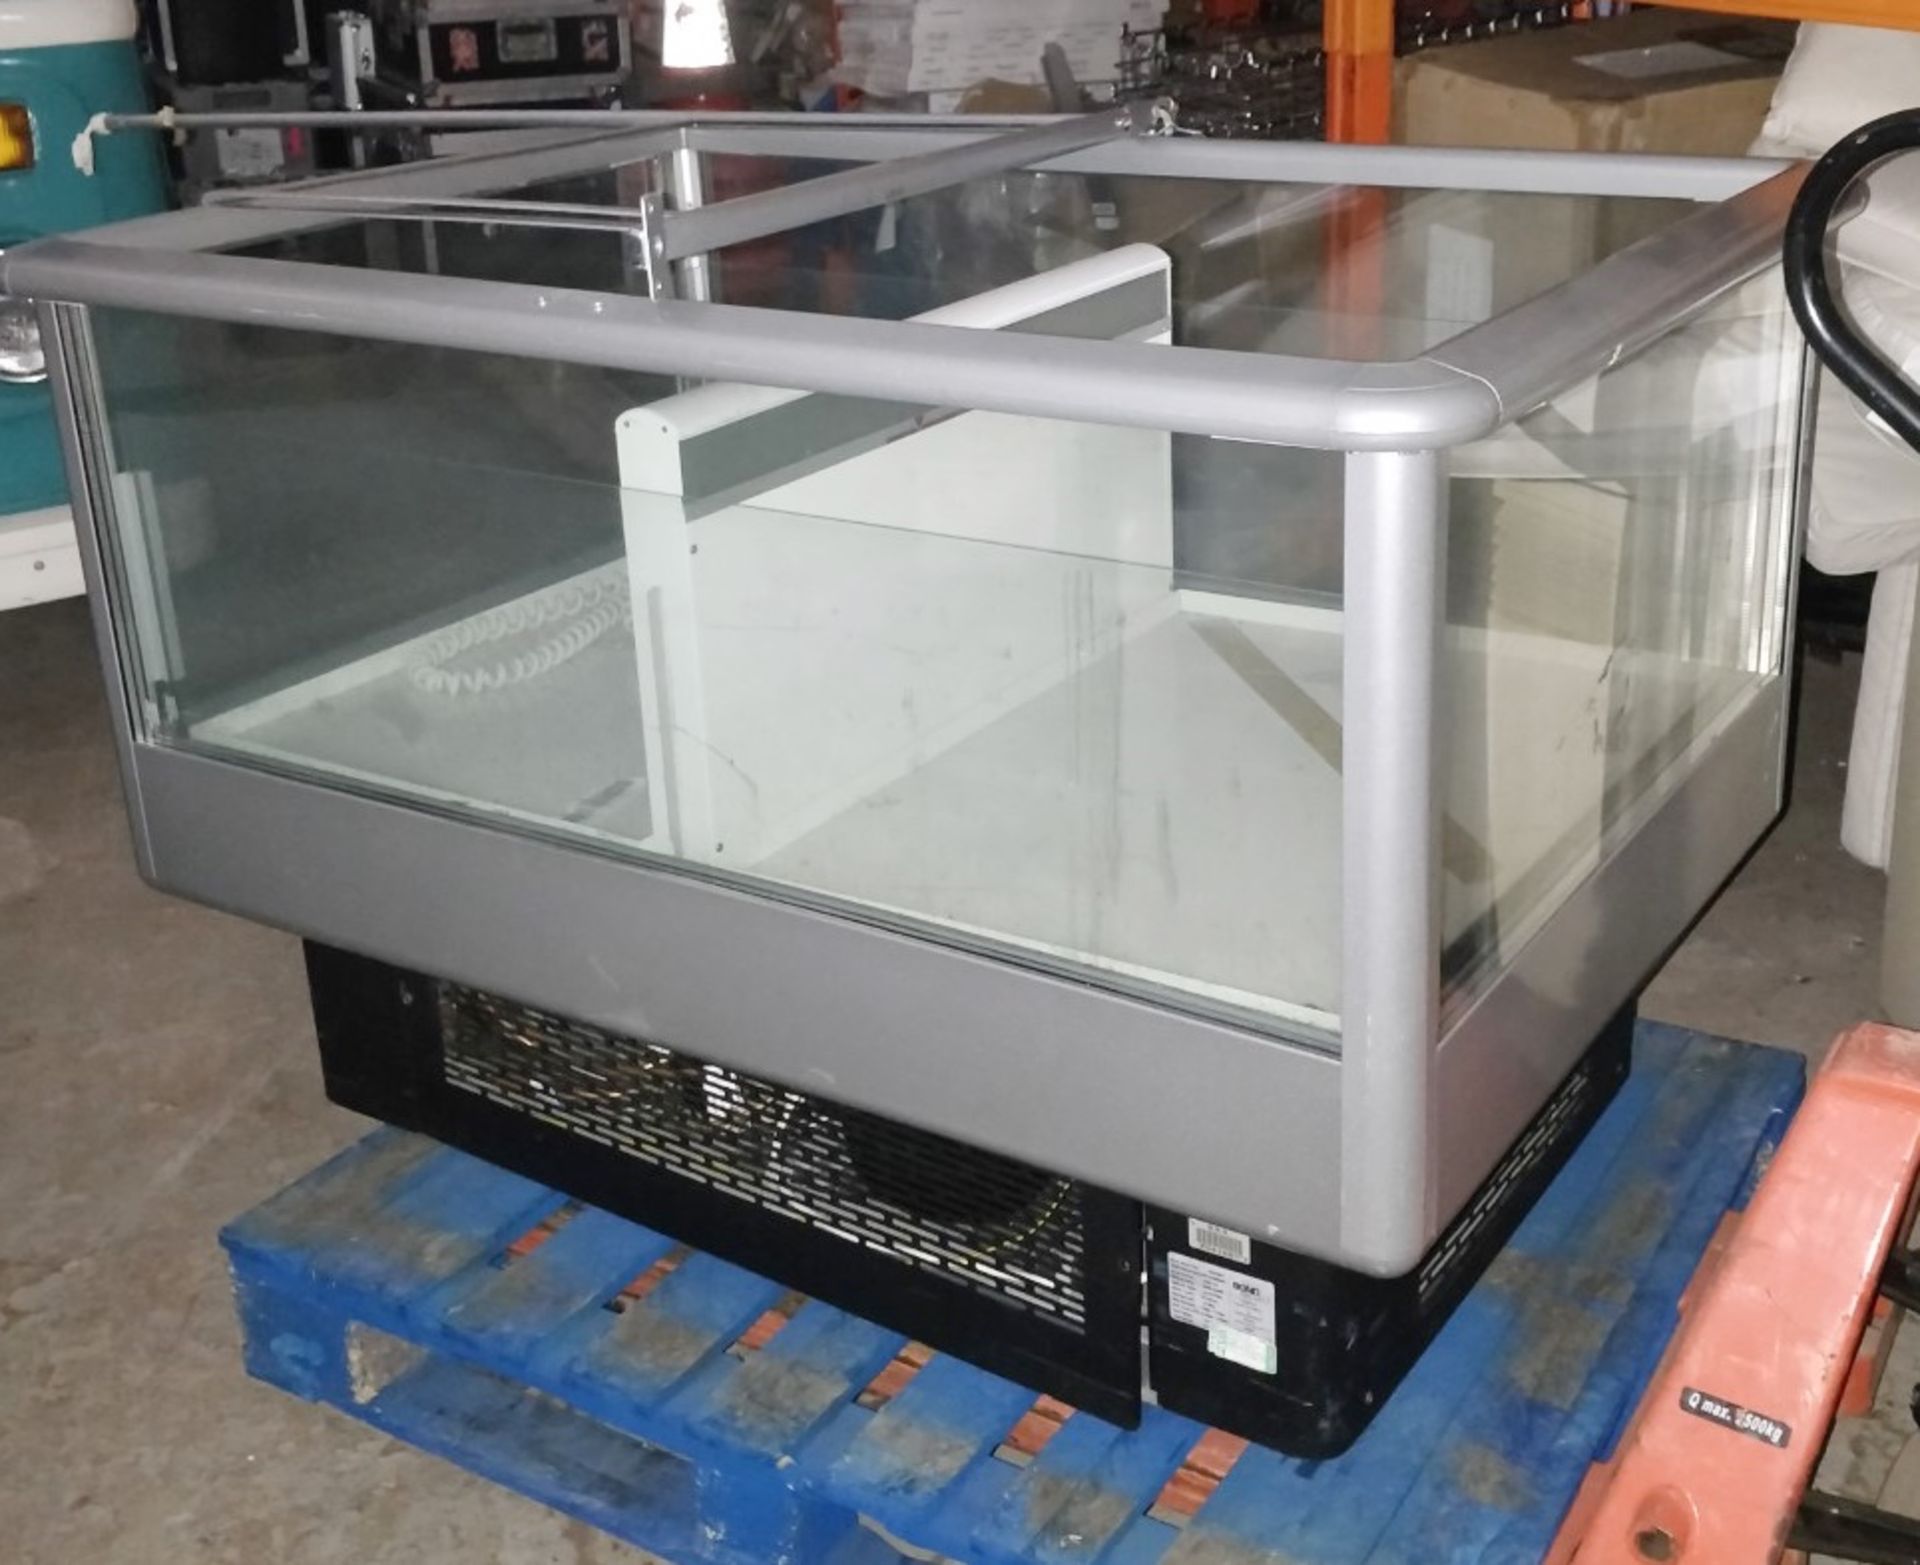 1 x Carrier COG33 Chiller Island For Promotional Sales - 240v - Size H99 x W140 x D95 cms - Recently - Image 4 of 5